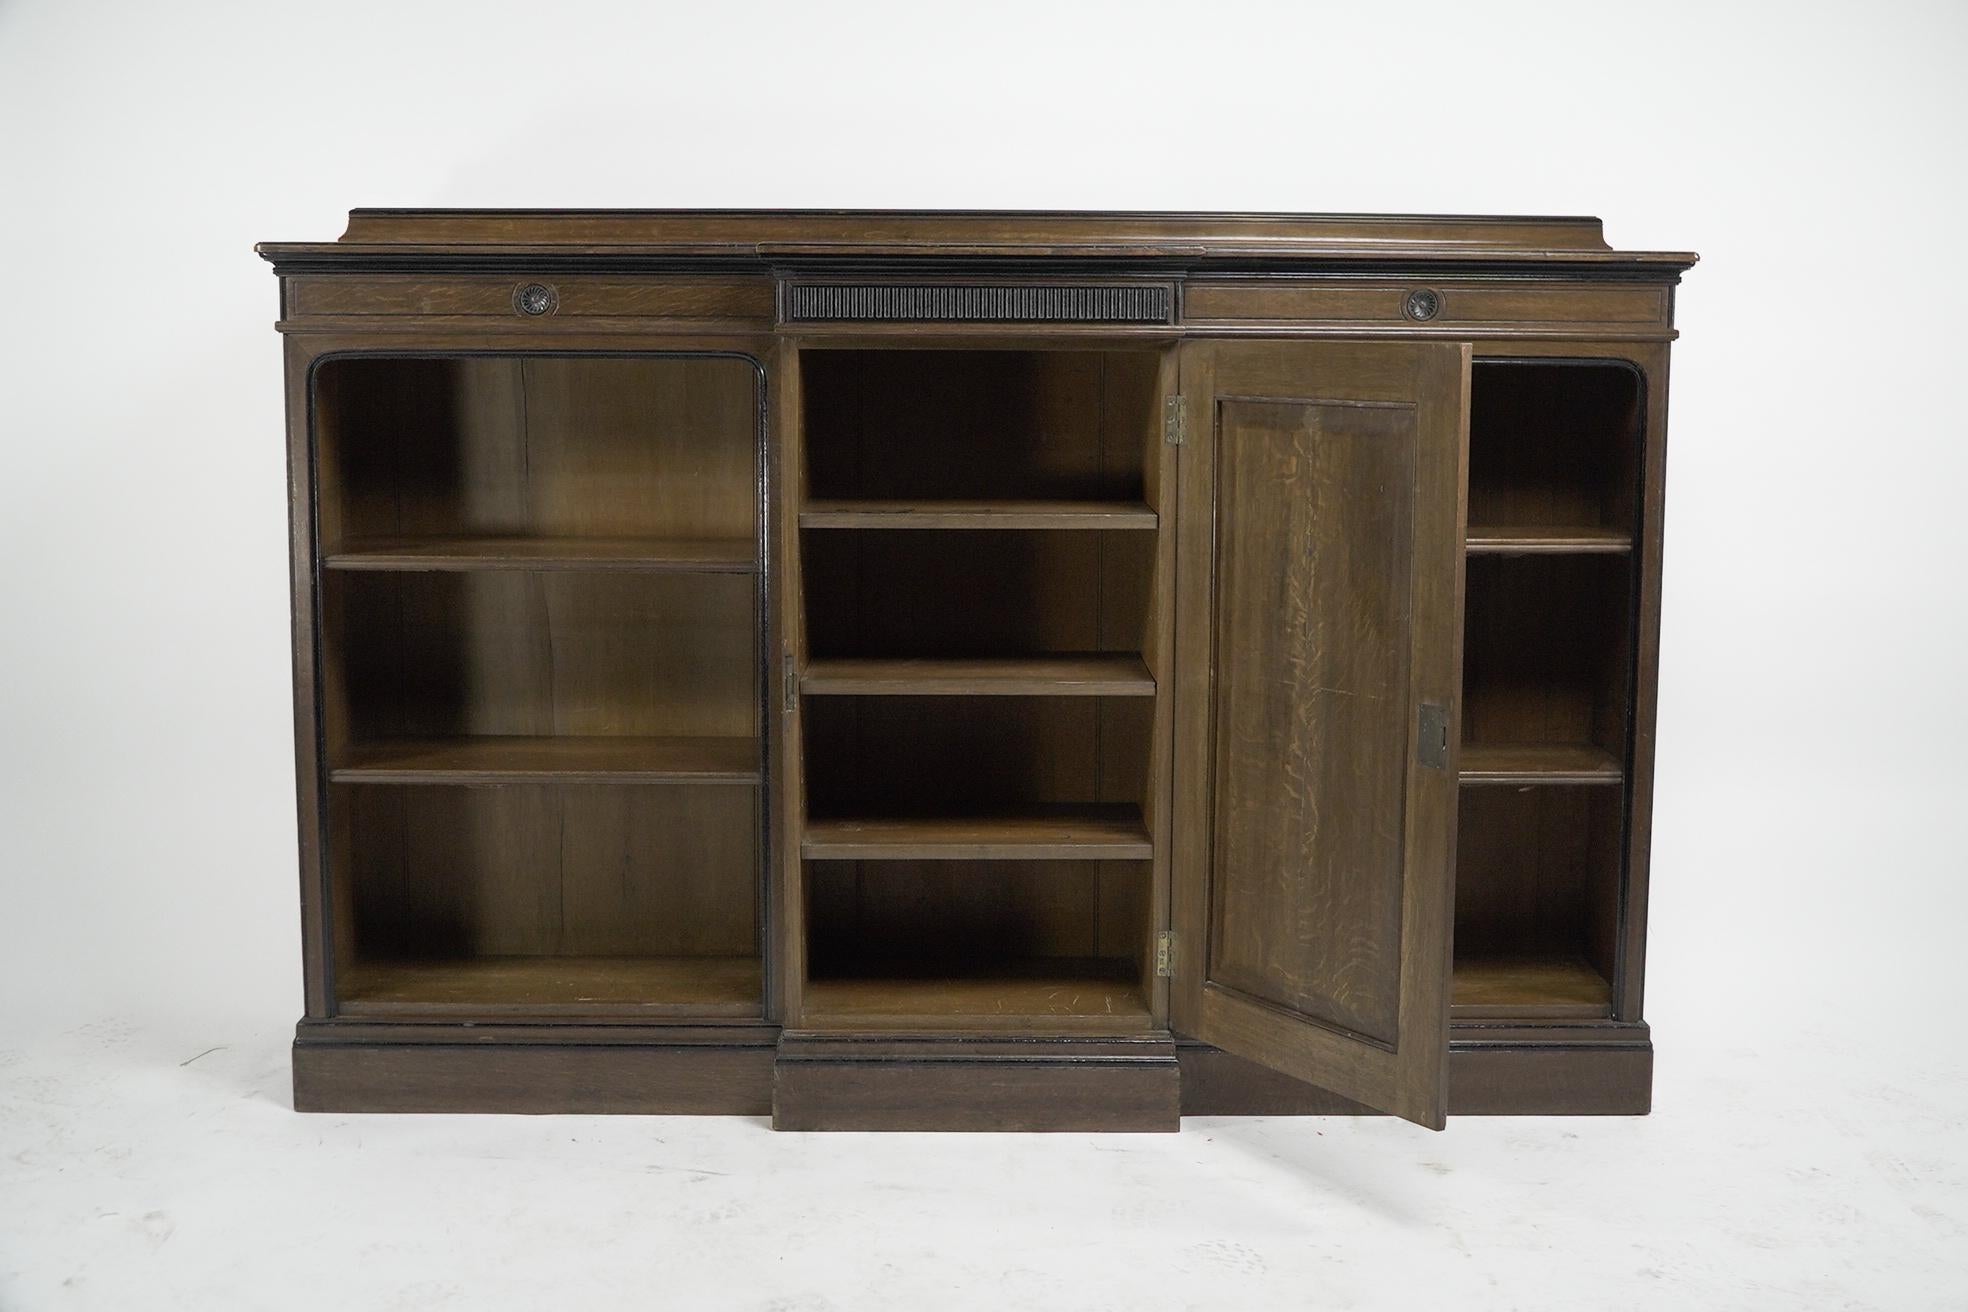 English Lambs of Manchester (stamped). A fine Aesthetic Movement oak breakfront bookcase For Sale